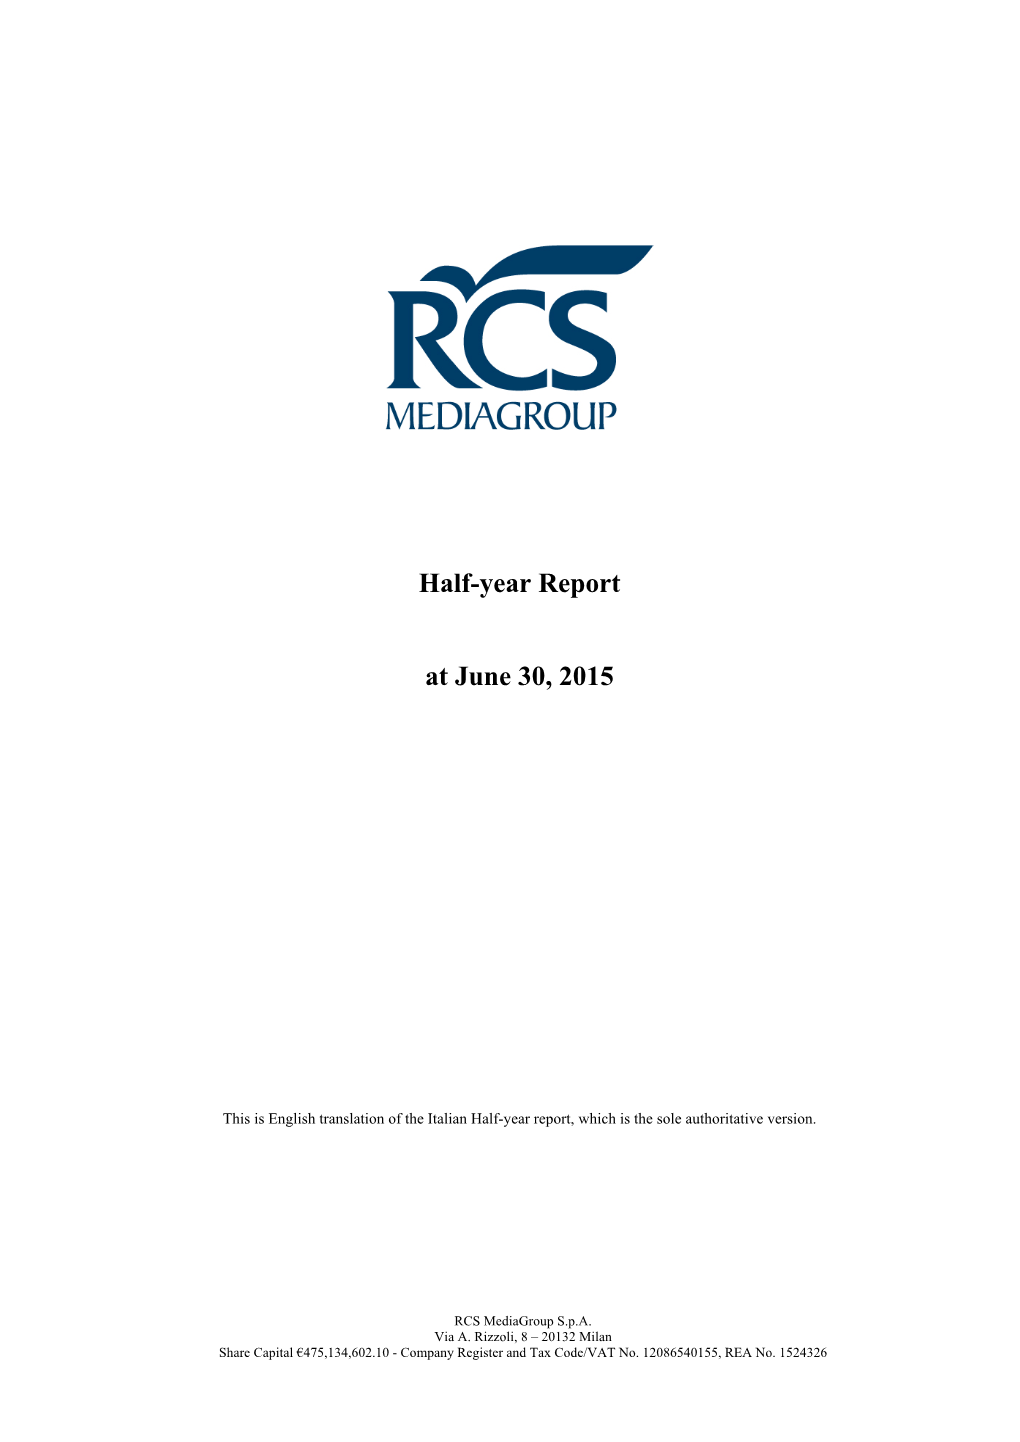 Half-Year Report at June 30, 2015 Was Approved by the Board of Directors That Authorised Its Publication